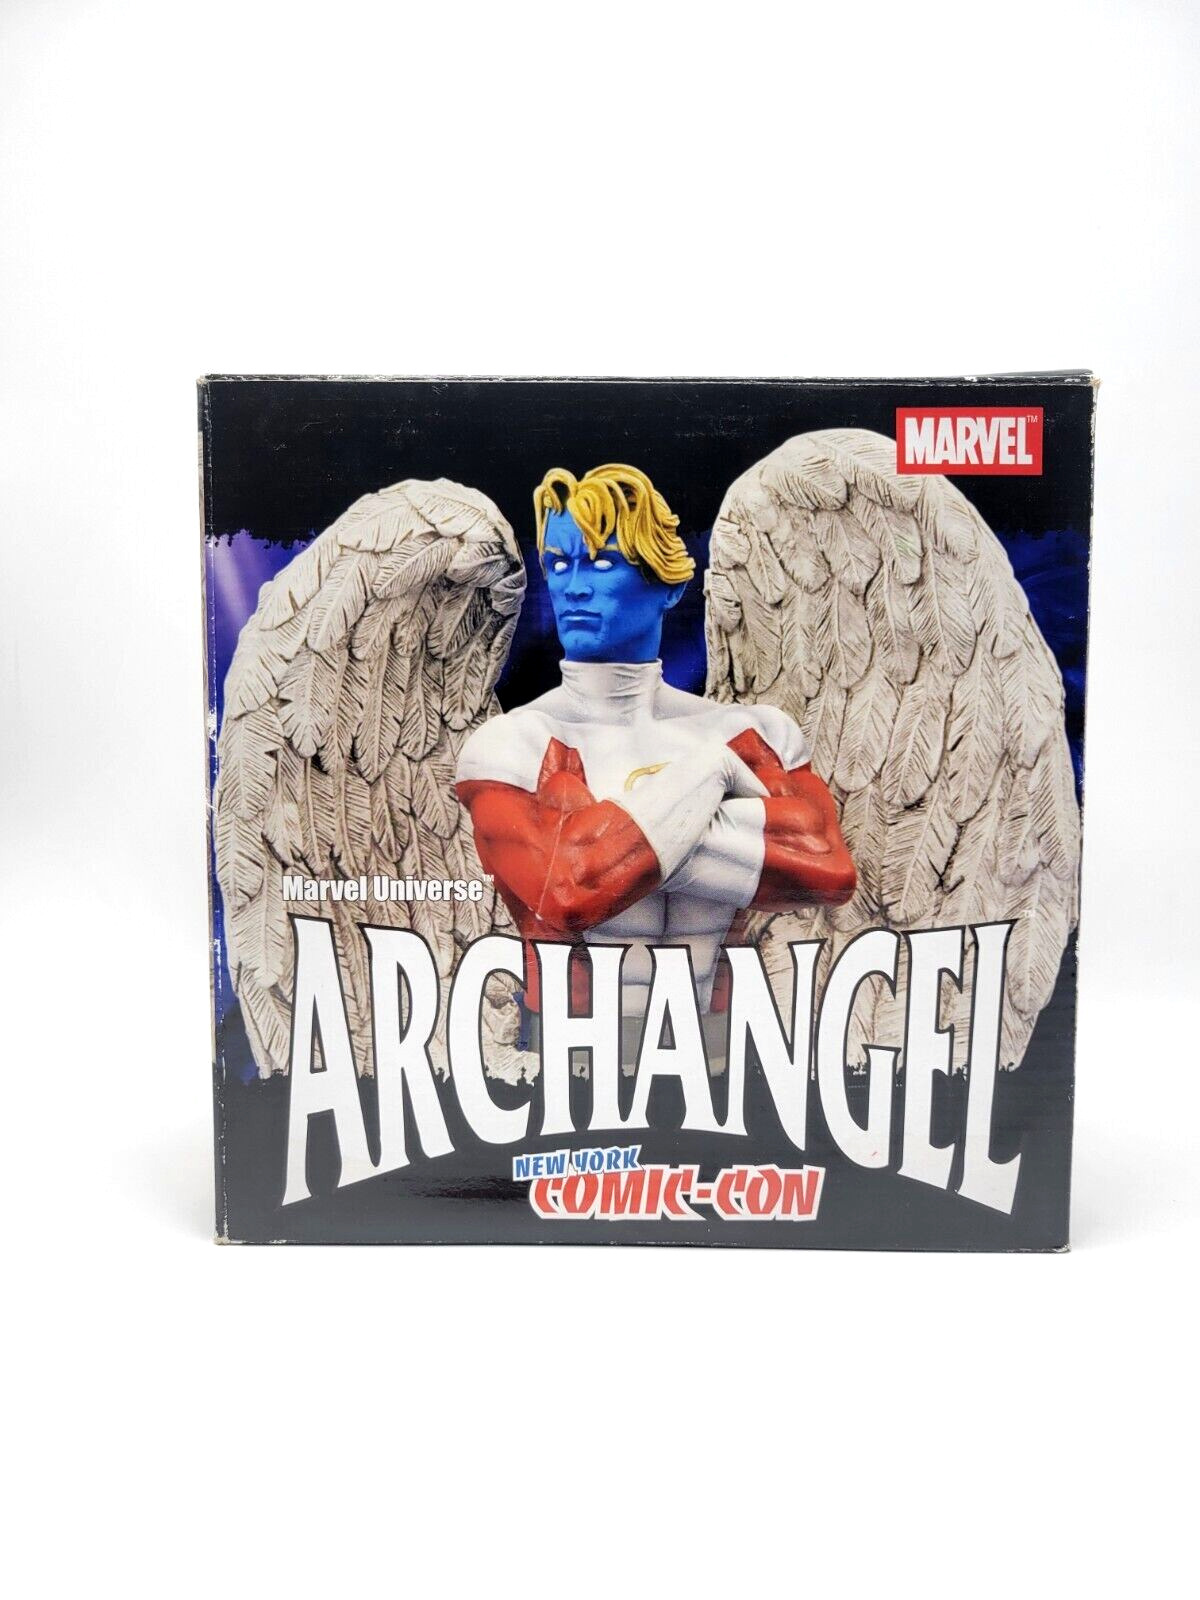 Archangel Marvel Bust NY Comic Con Exclusive Diamond Select 0/500 Artist's Proof